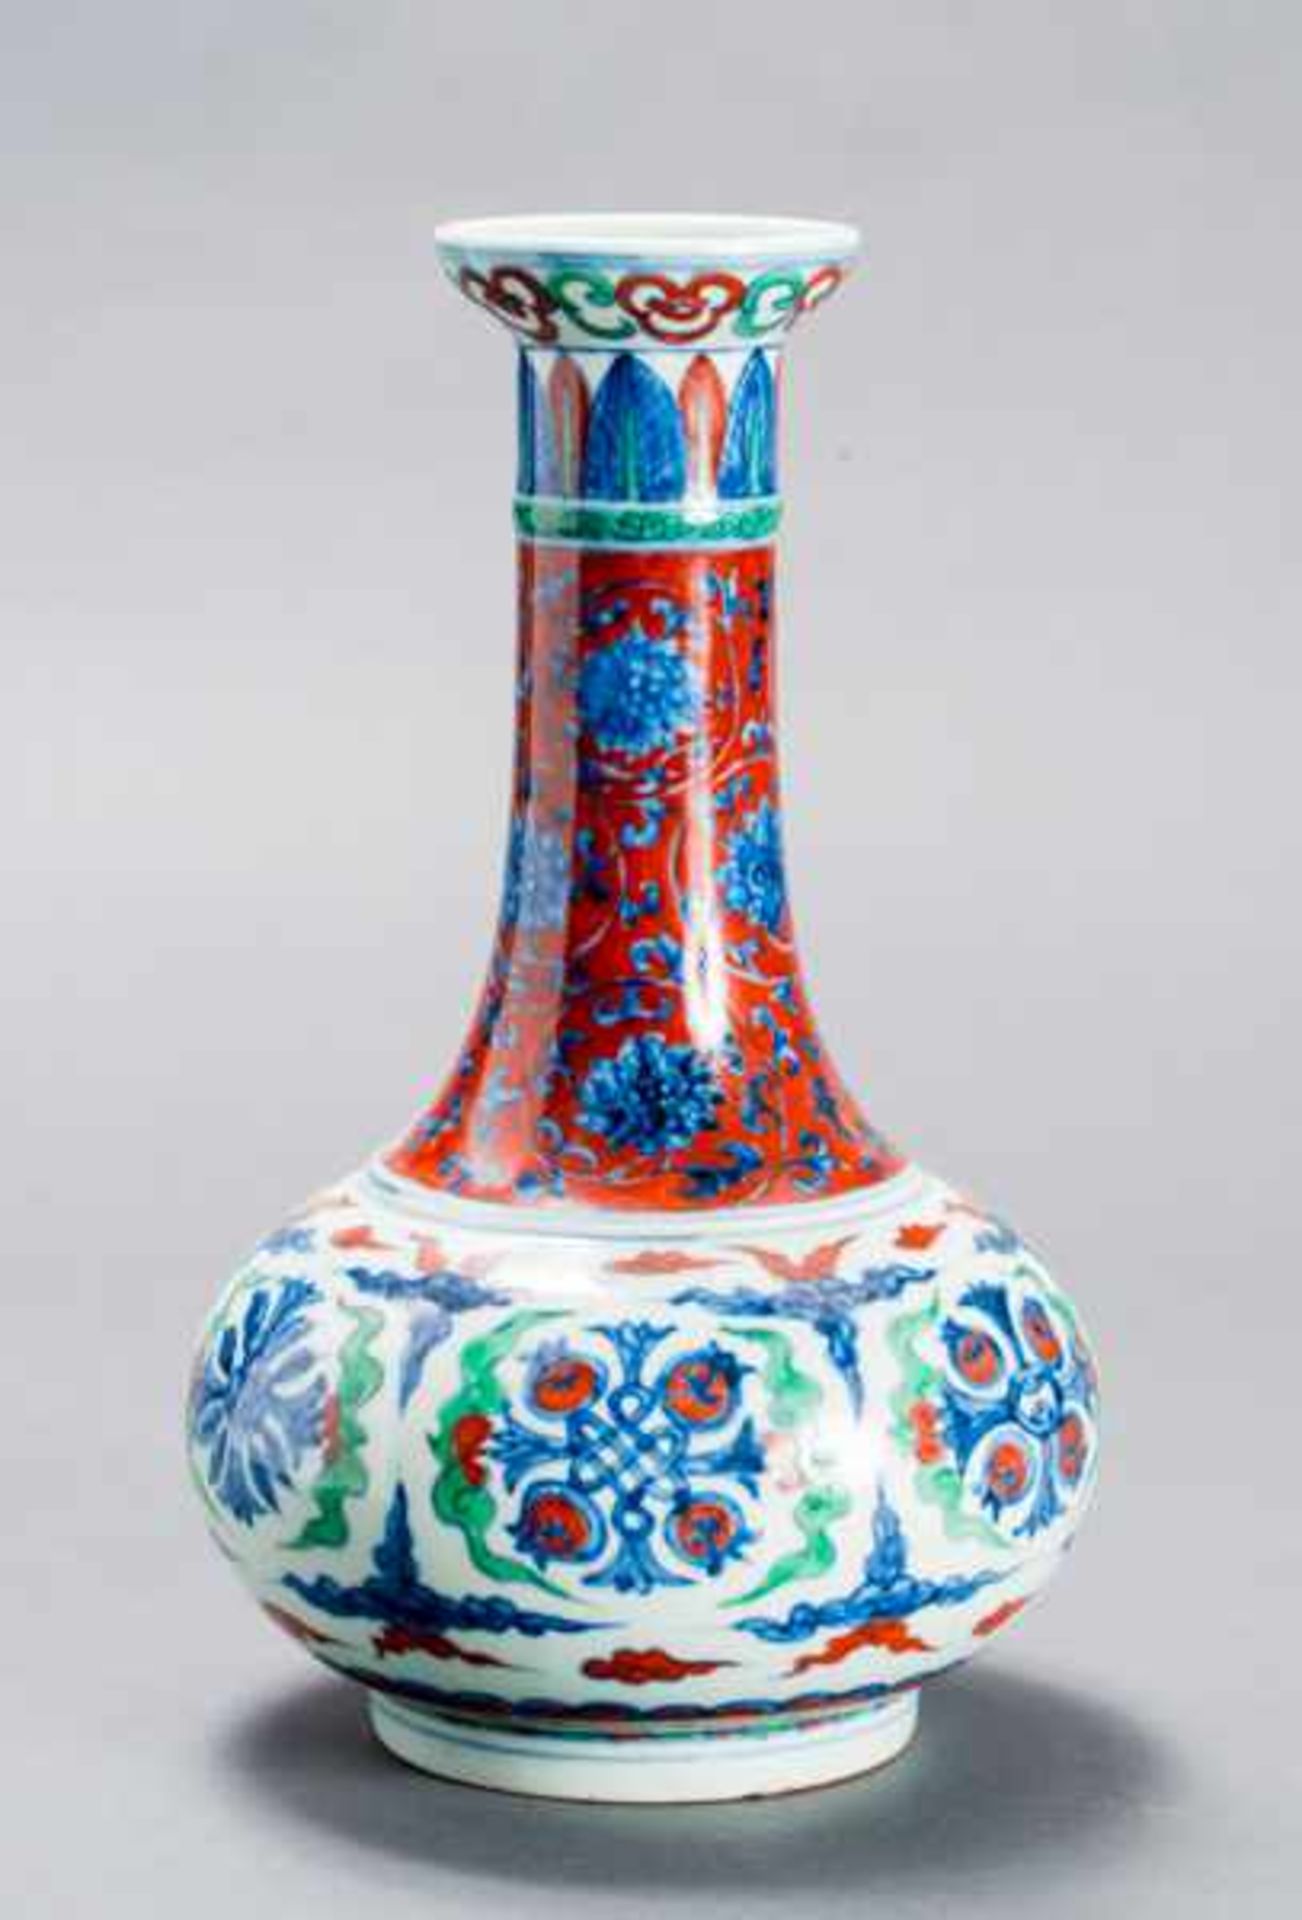 VASE WITH BLOSSOMS AND ENDLESS KNOT Porcelain with enamel painting. China, Ming-dynasty